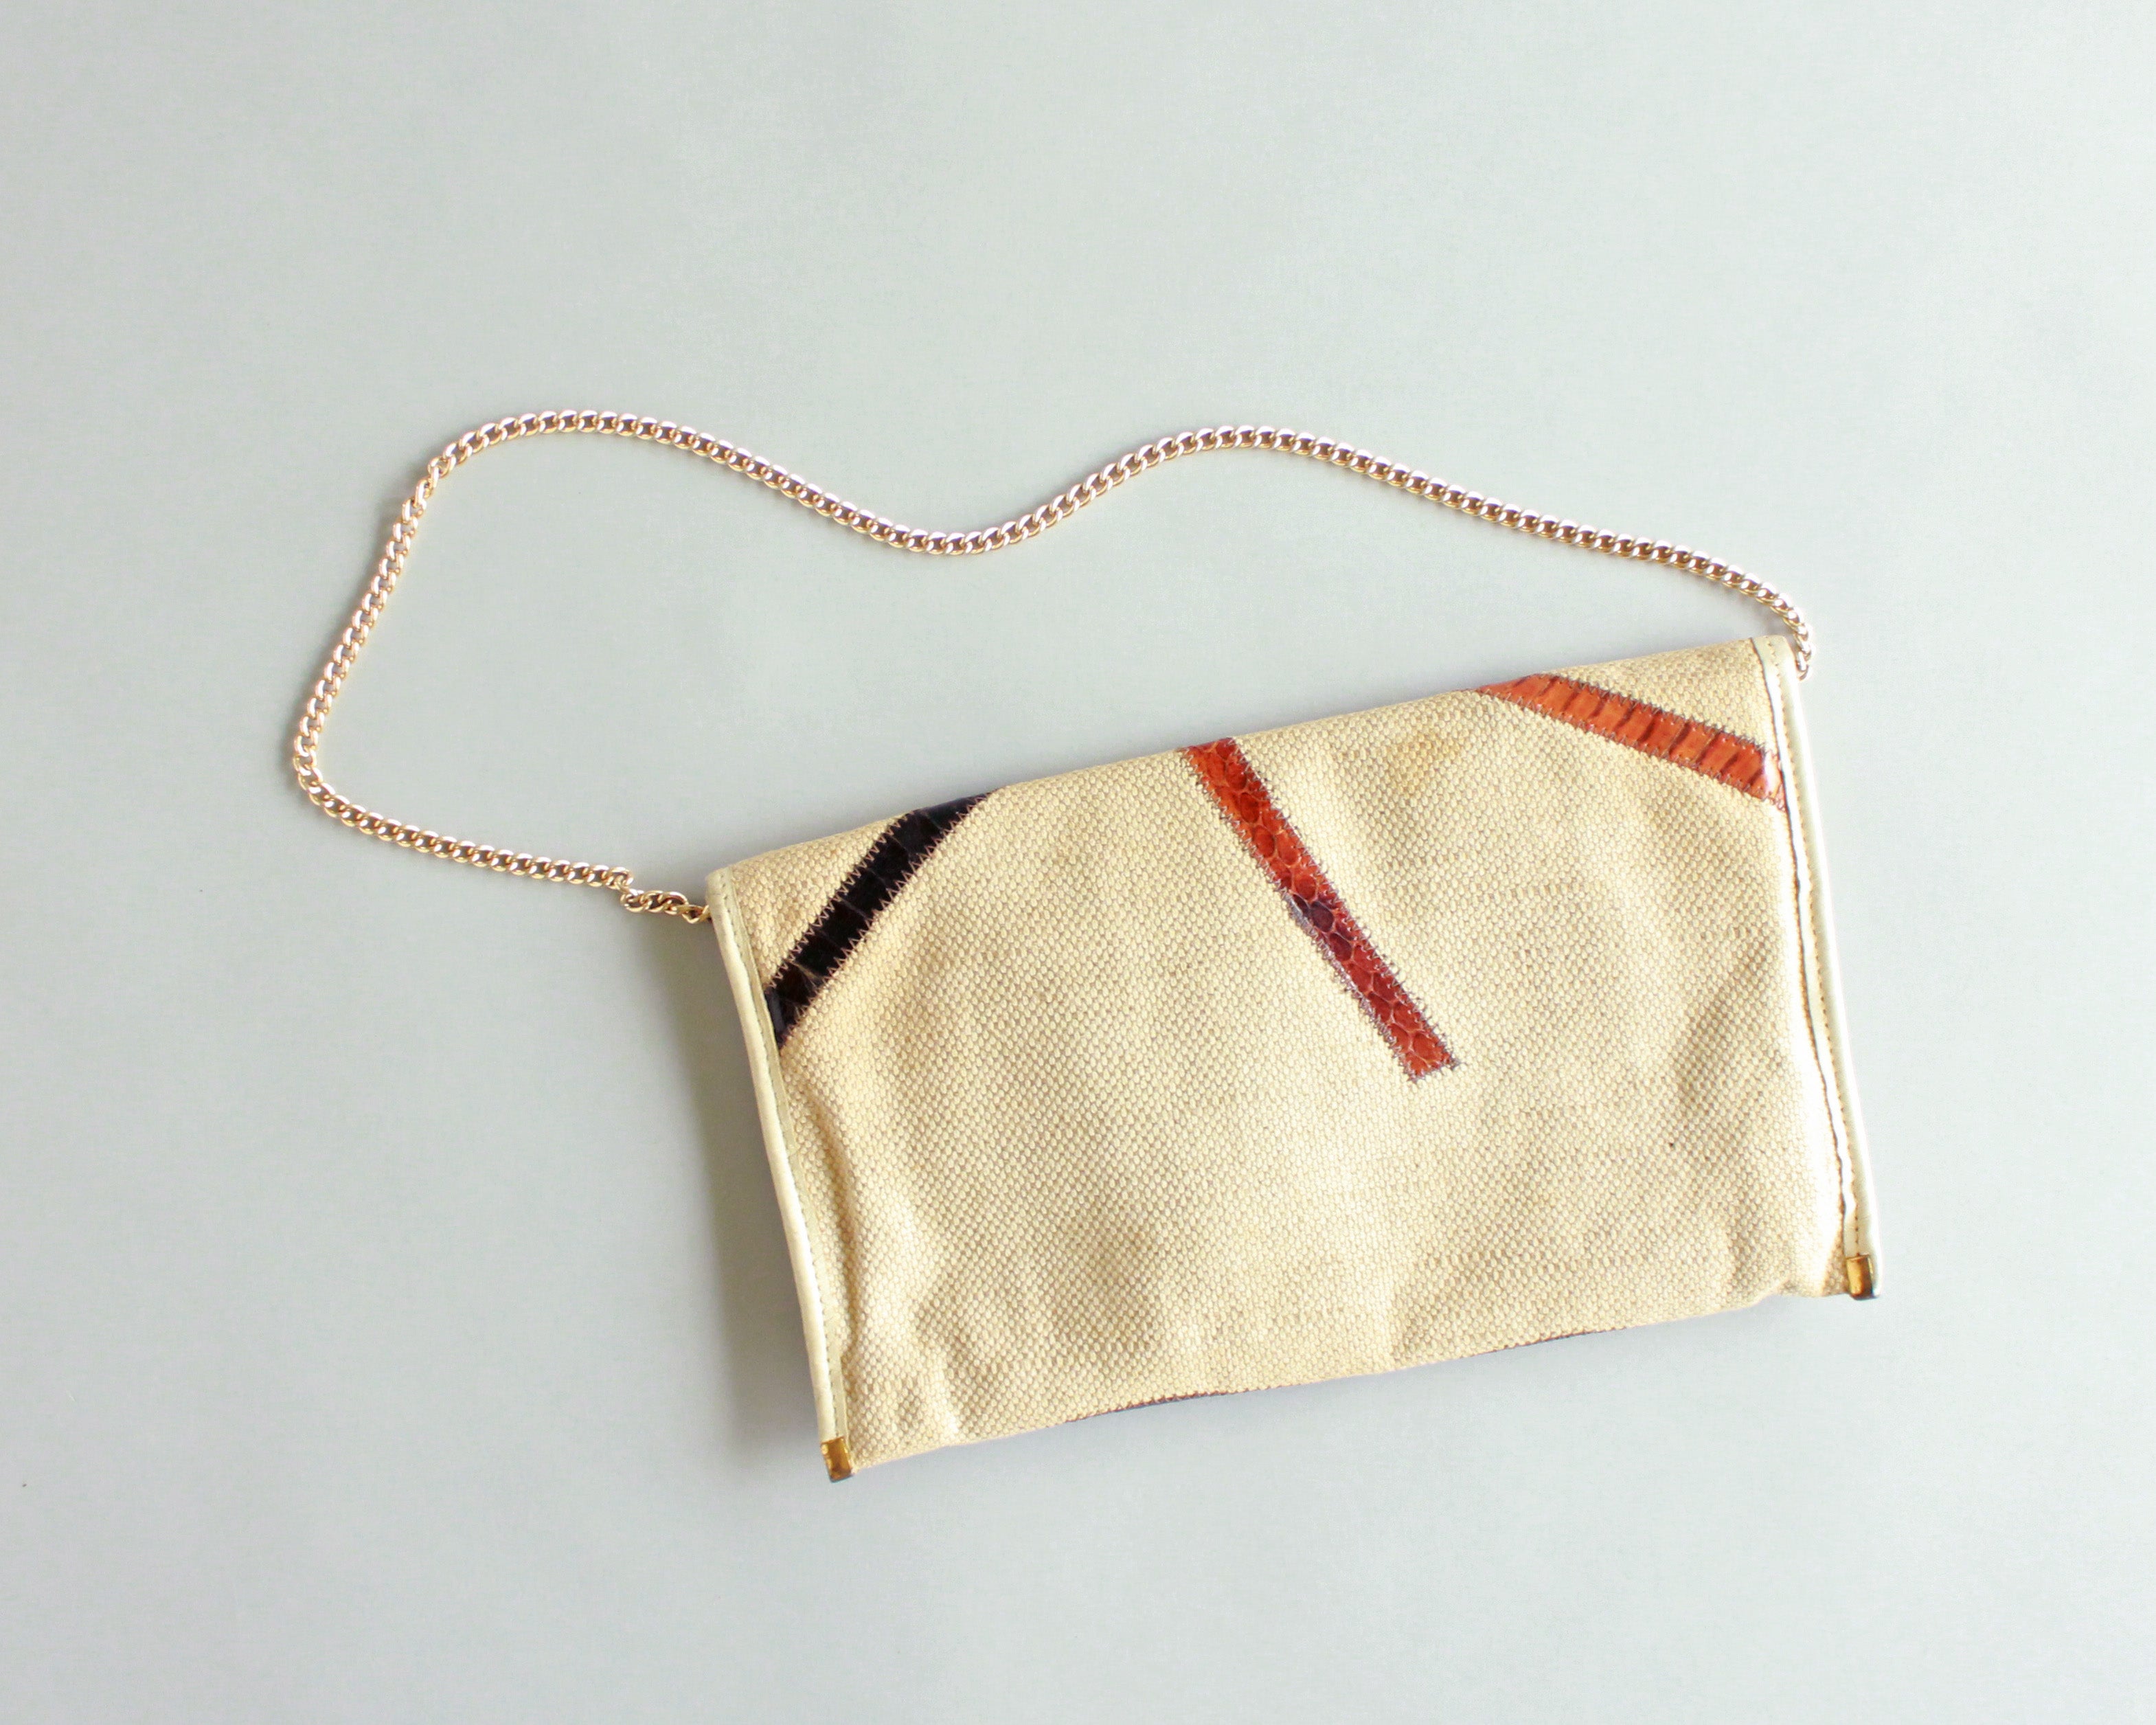 Retro 1970's envelope purse with snakeskin patches and gold chain